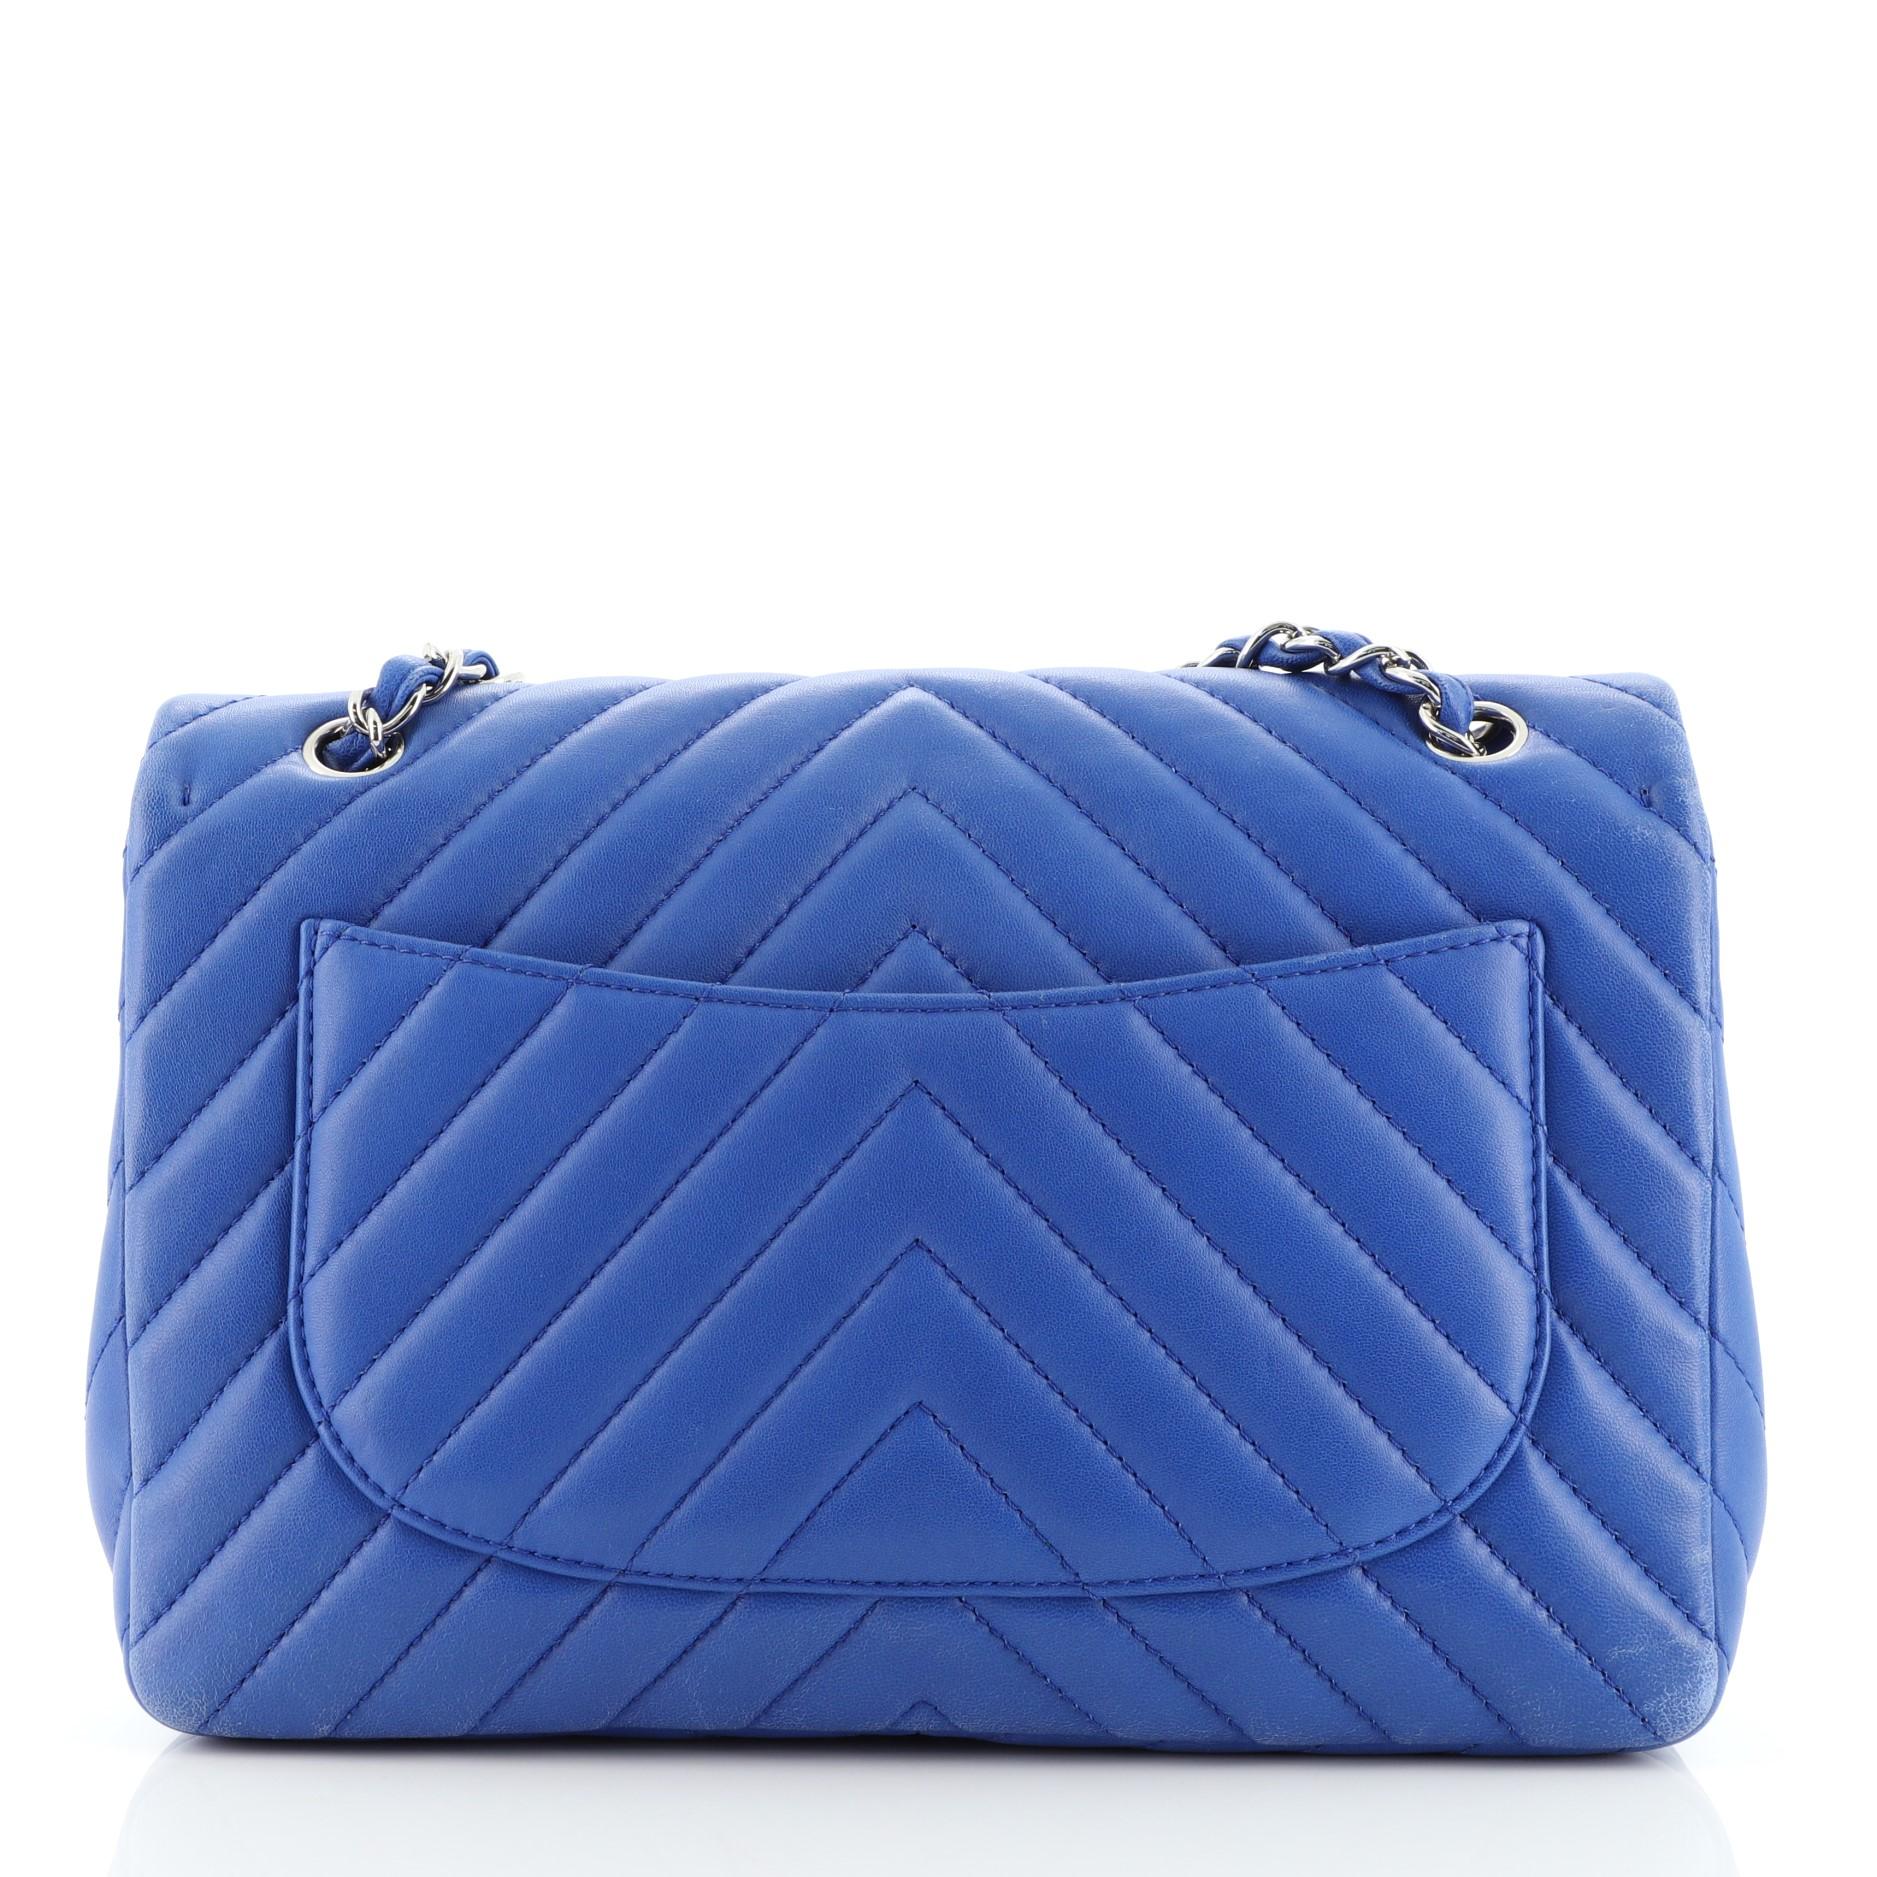 Chanel Classic Single Flap Bag Chevron Lambskin Jumbo In Good Condition For Sale In Irvine, CA